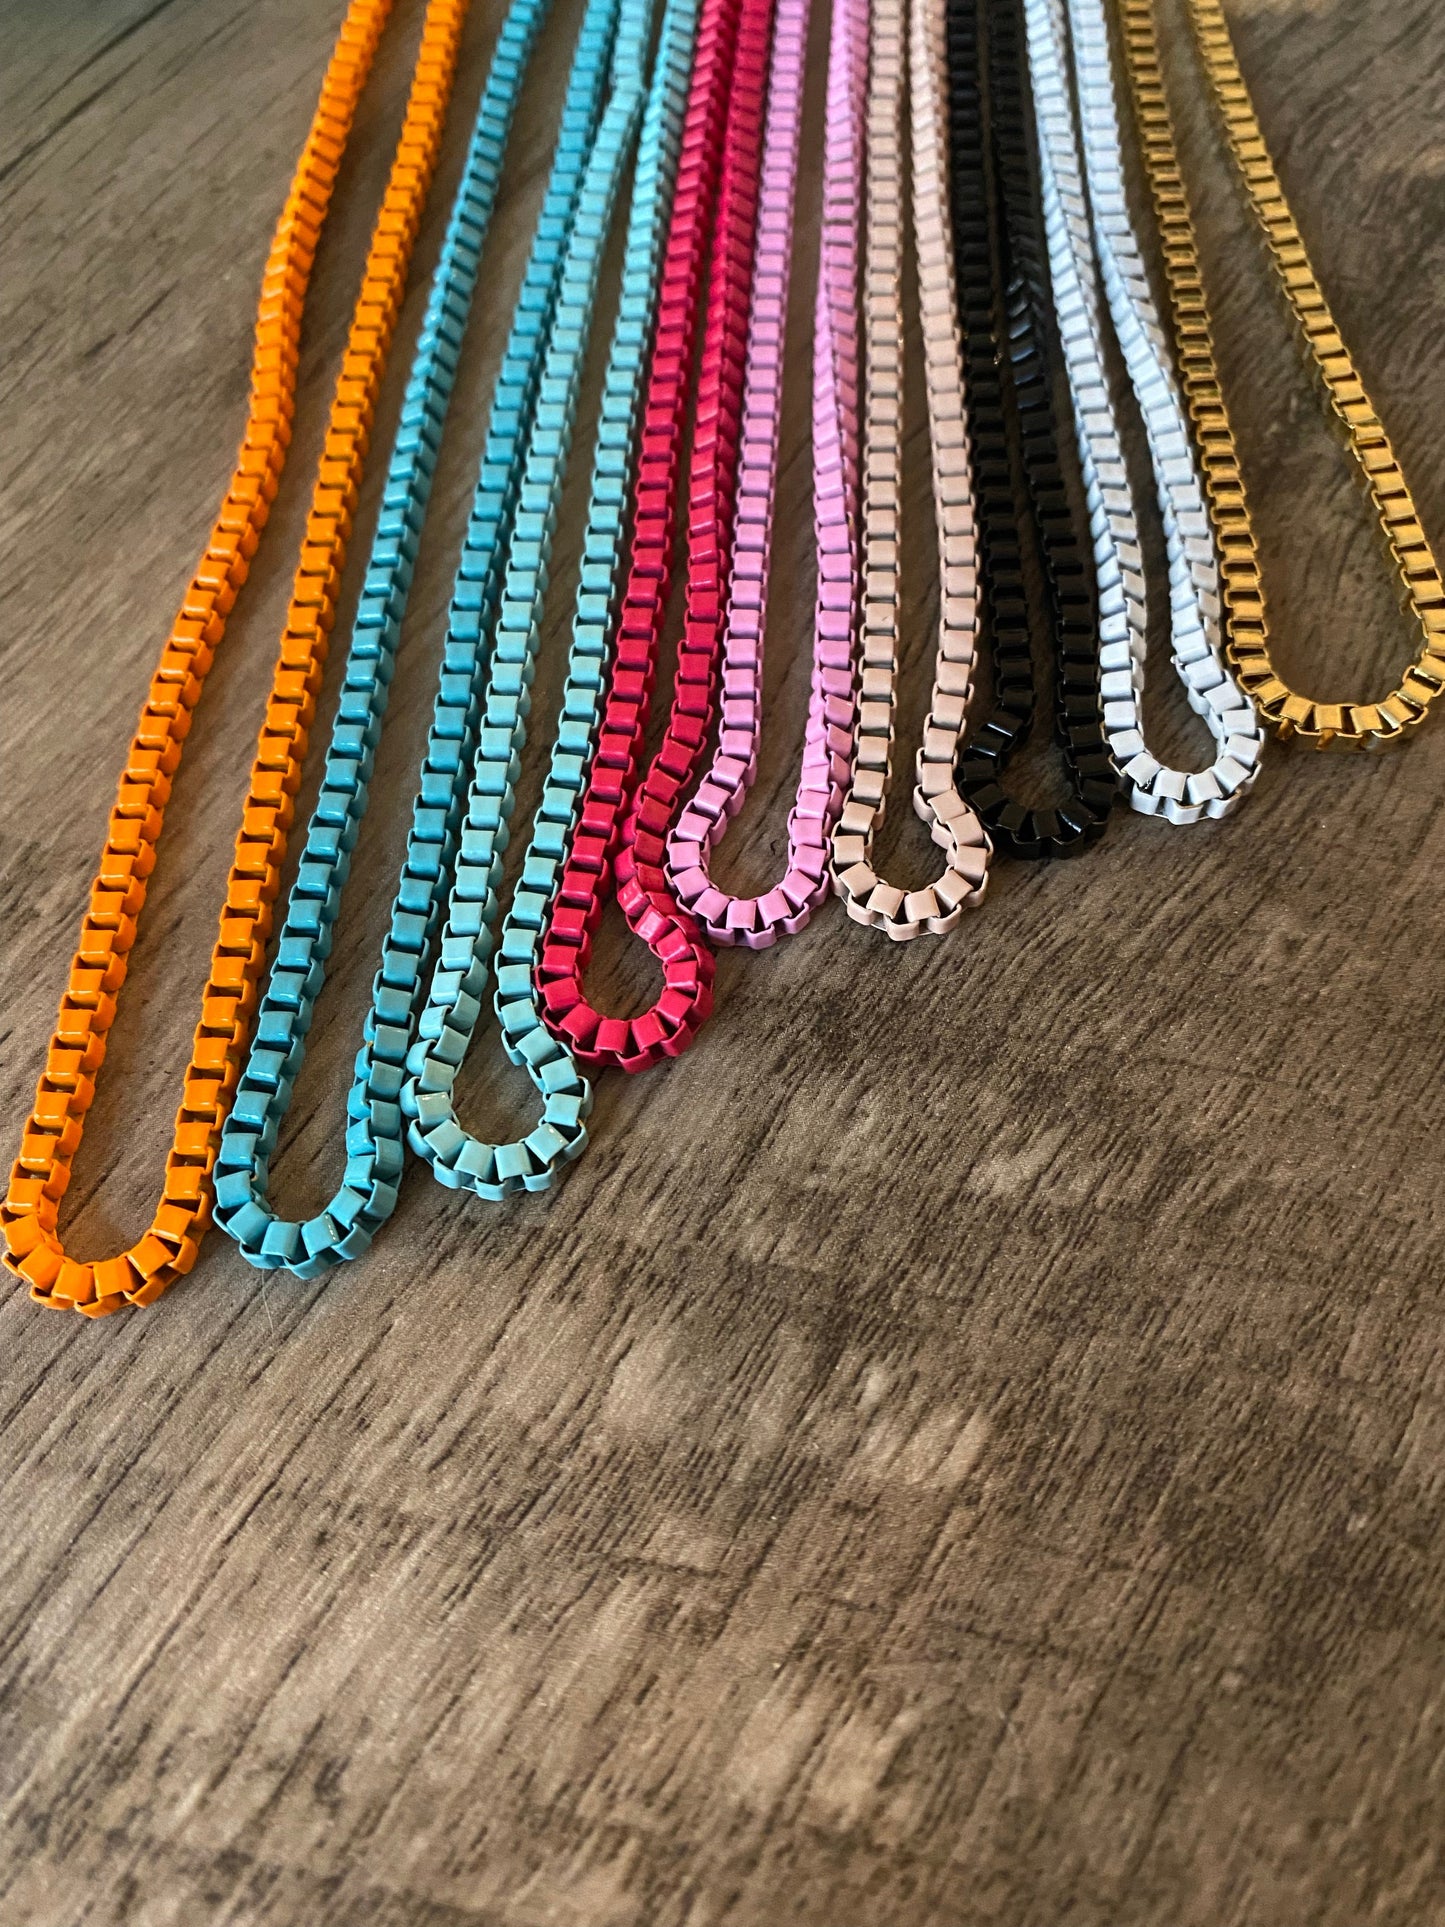 Color chain bike necklace 16 inch